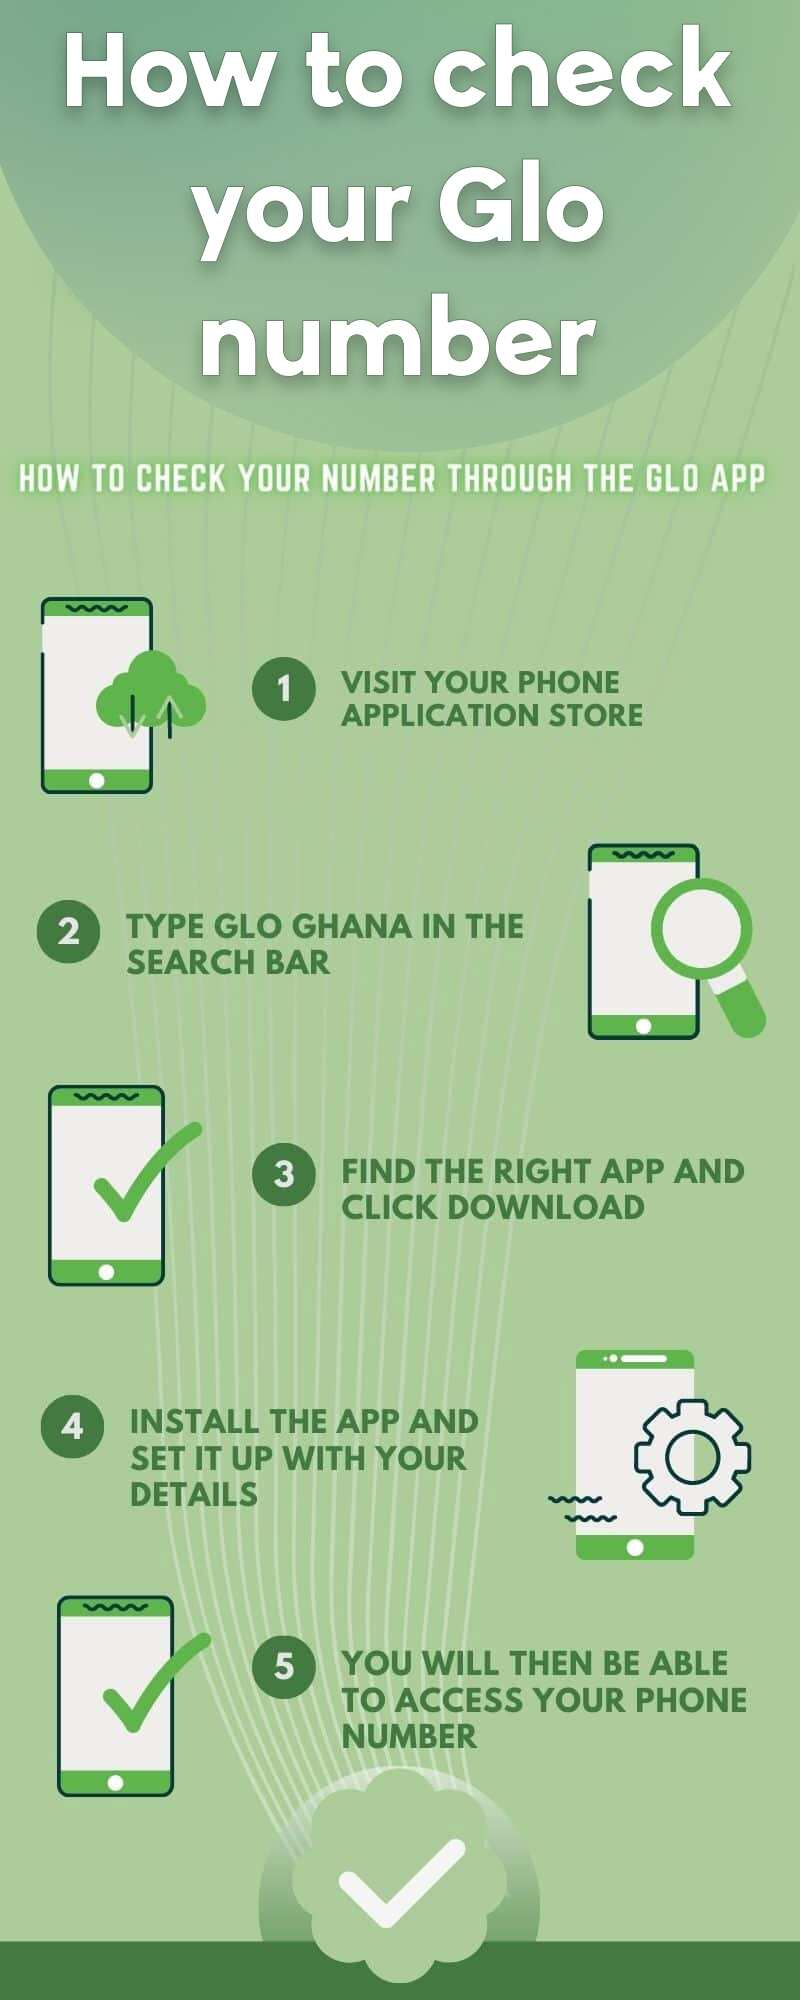 How to check your Glo number